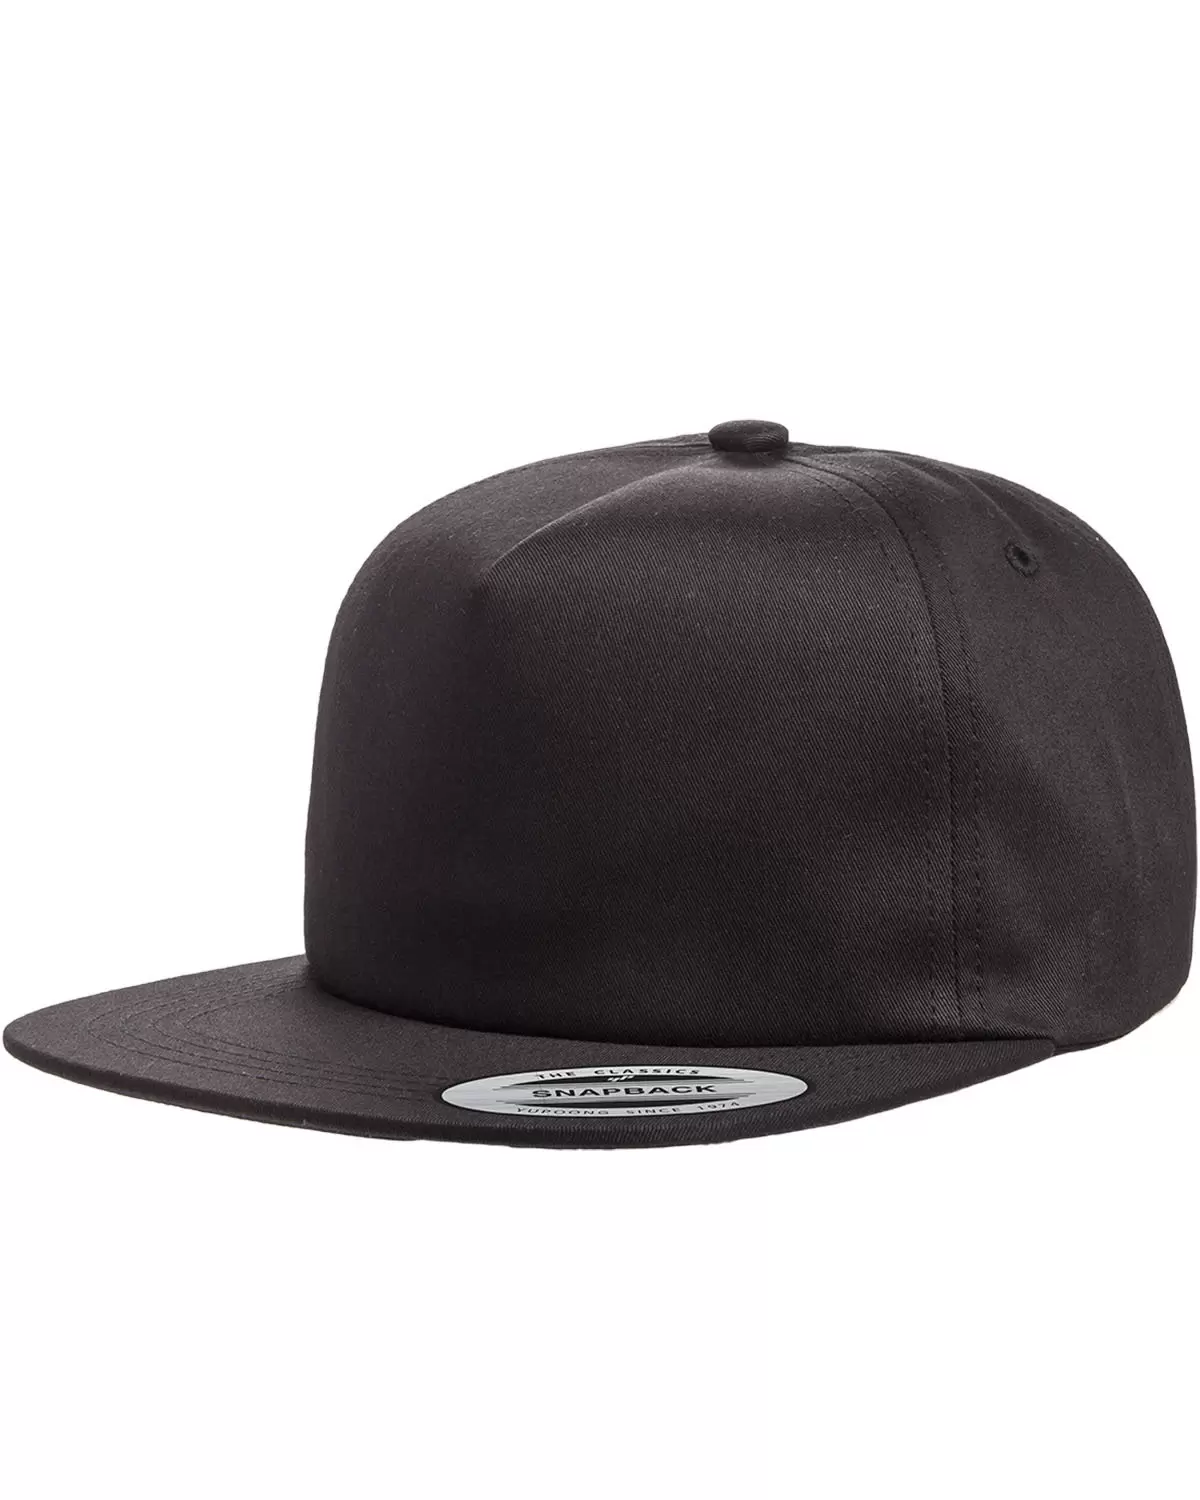 Yupoong-Flex Fit 6502 Unstructured Cap - Five-Panel Snapback From